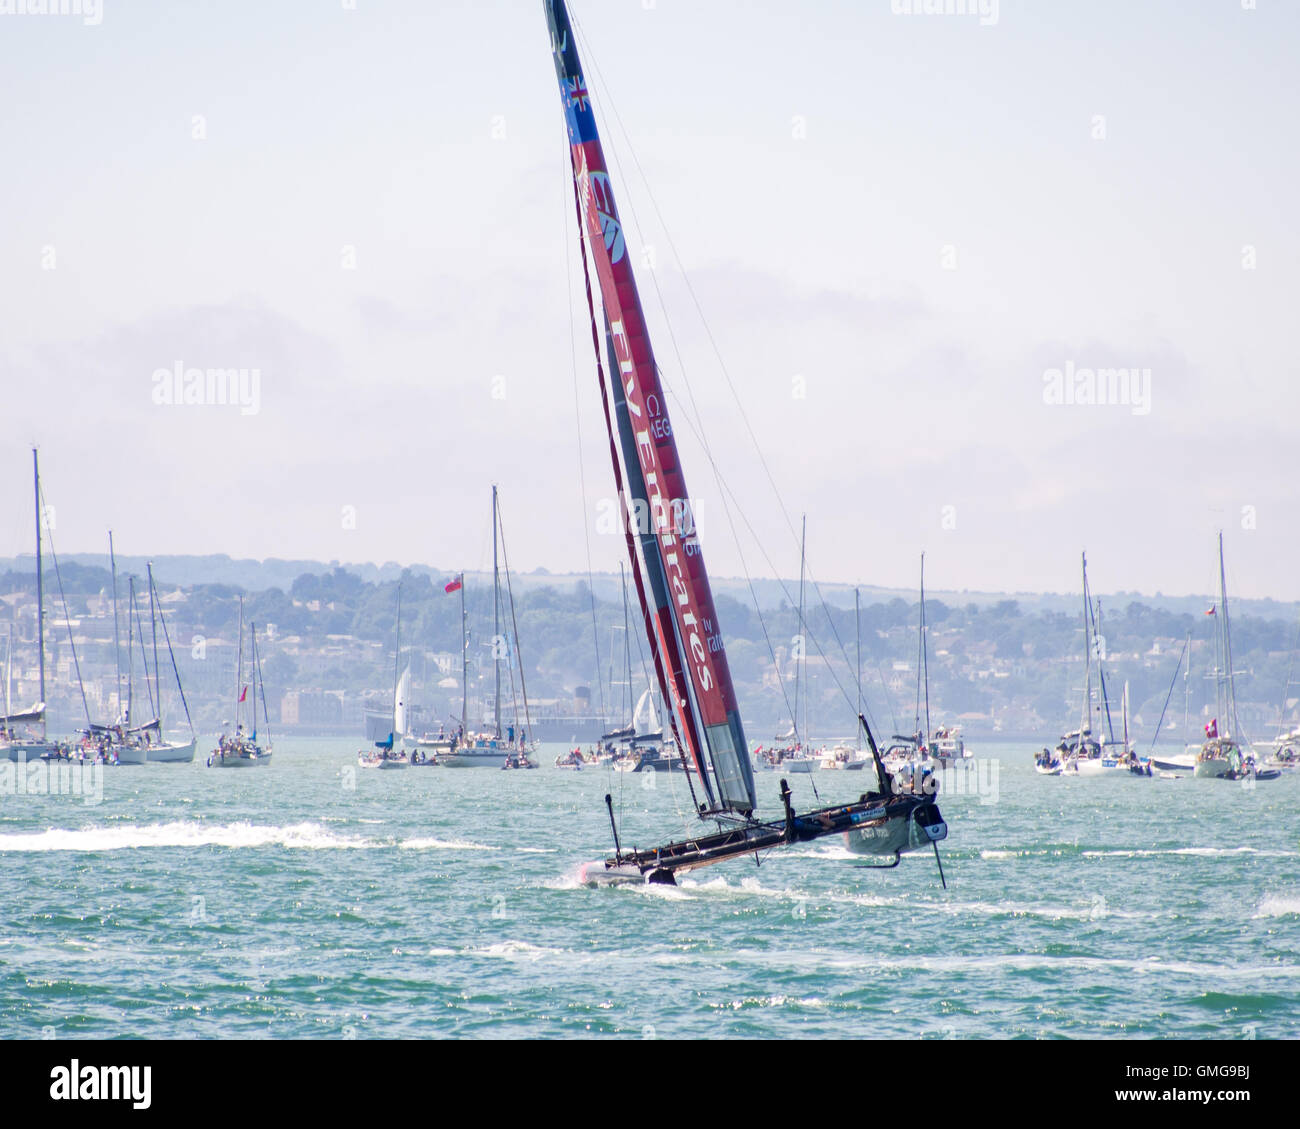 The C45 class catamaran of Team Emirates New Zealand under sail during the Americas Cup World Series in Portsmouth 2016 Stock Photo